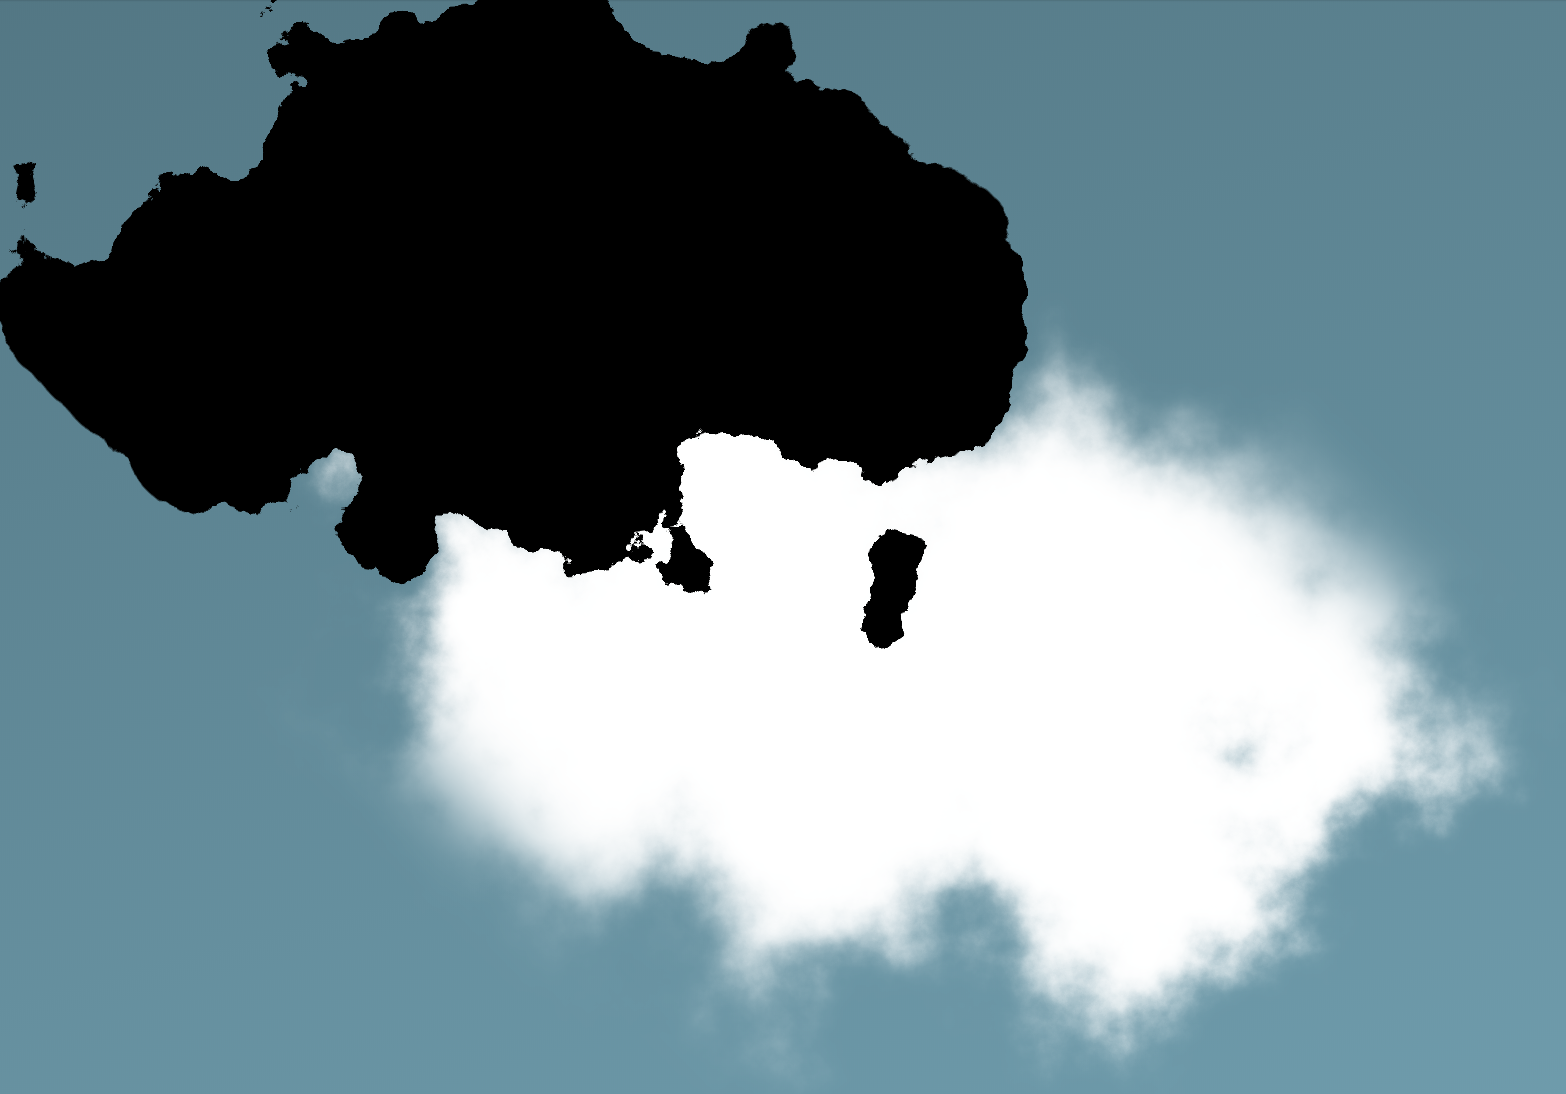 Drawing Realistic Clouds with SVG and CSS